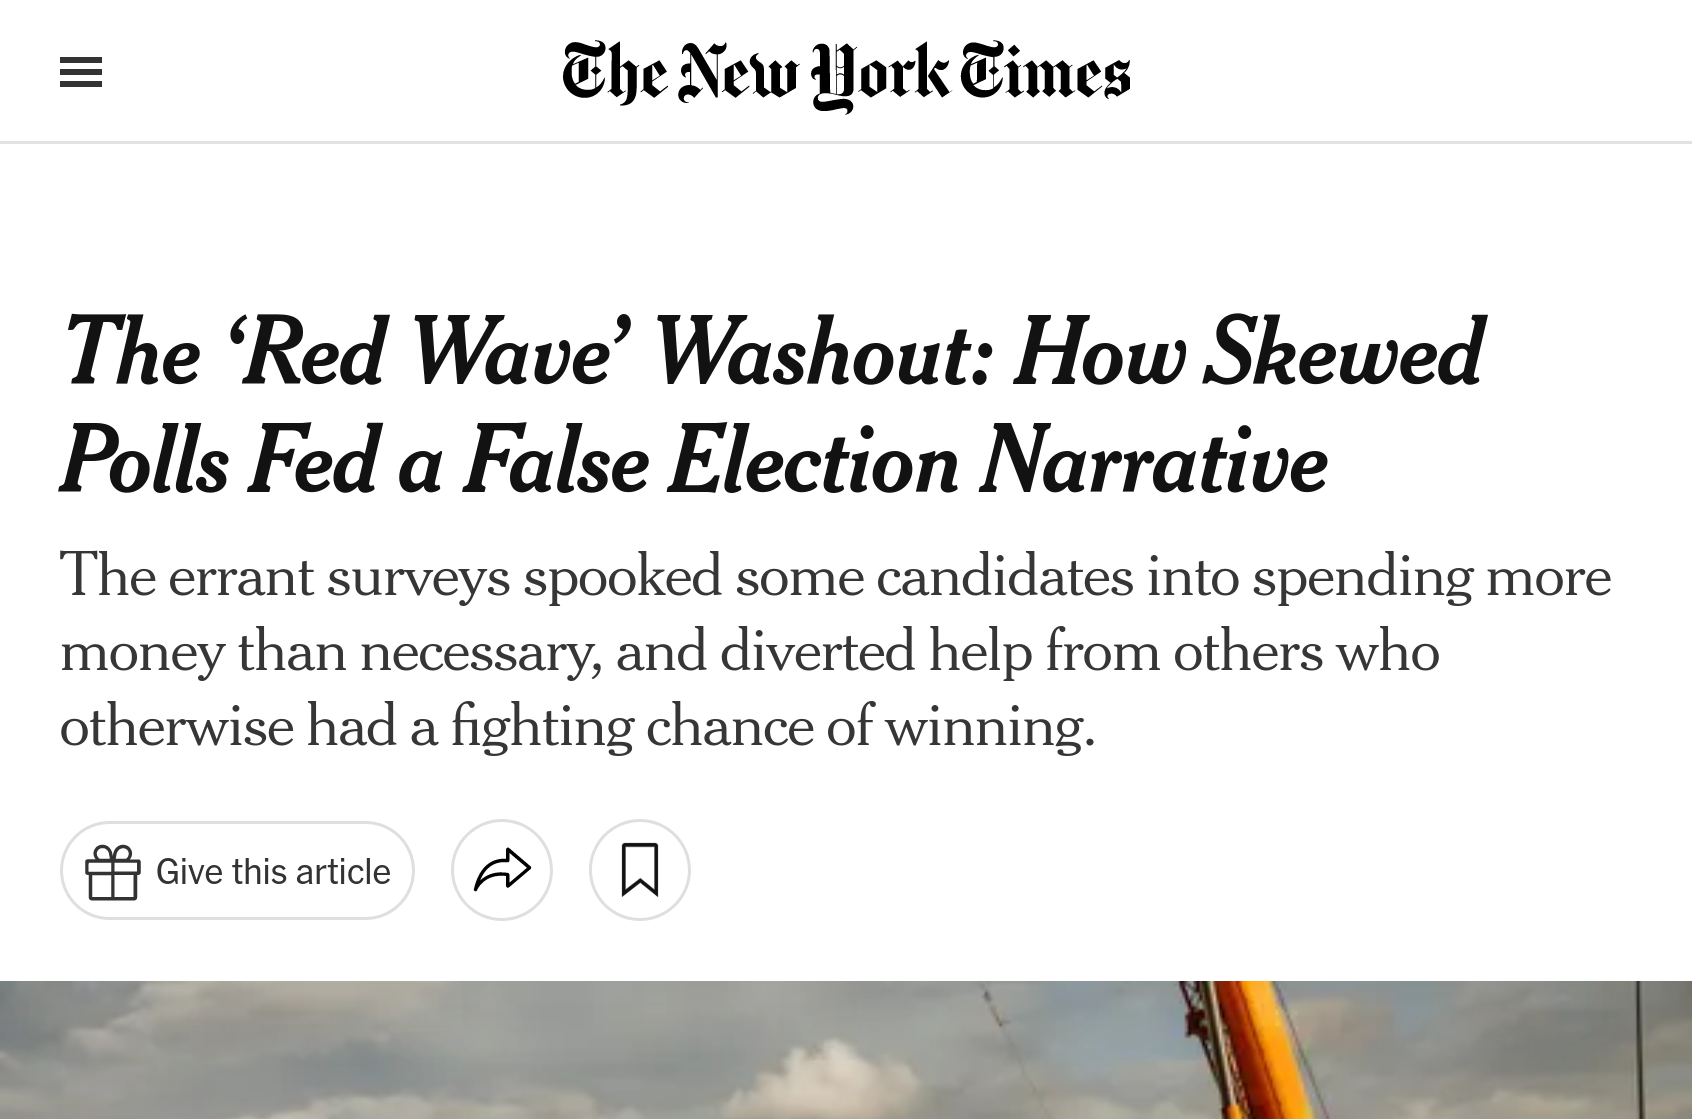 NYT Headline: The "Red Wave" Washout